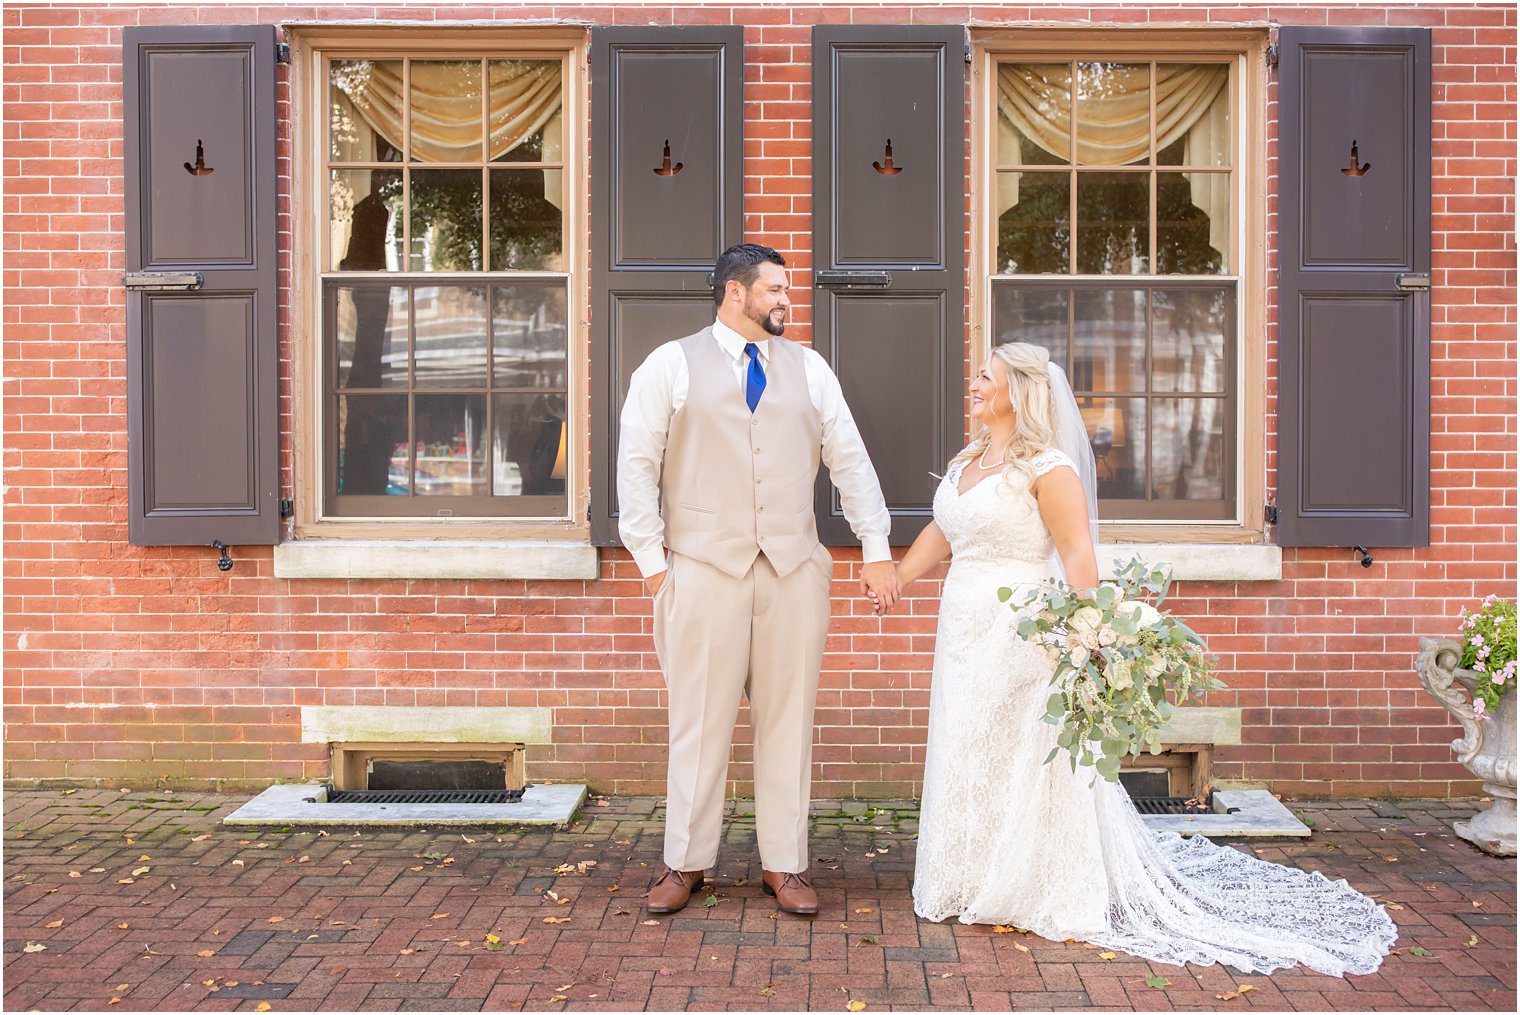 New Jersey couple holds hands and looks at each other before Micro Wedding at The Lily Inn